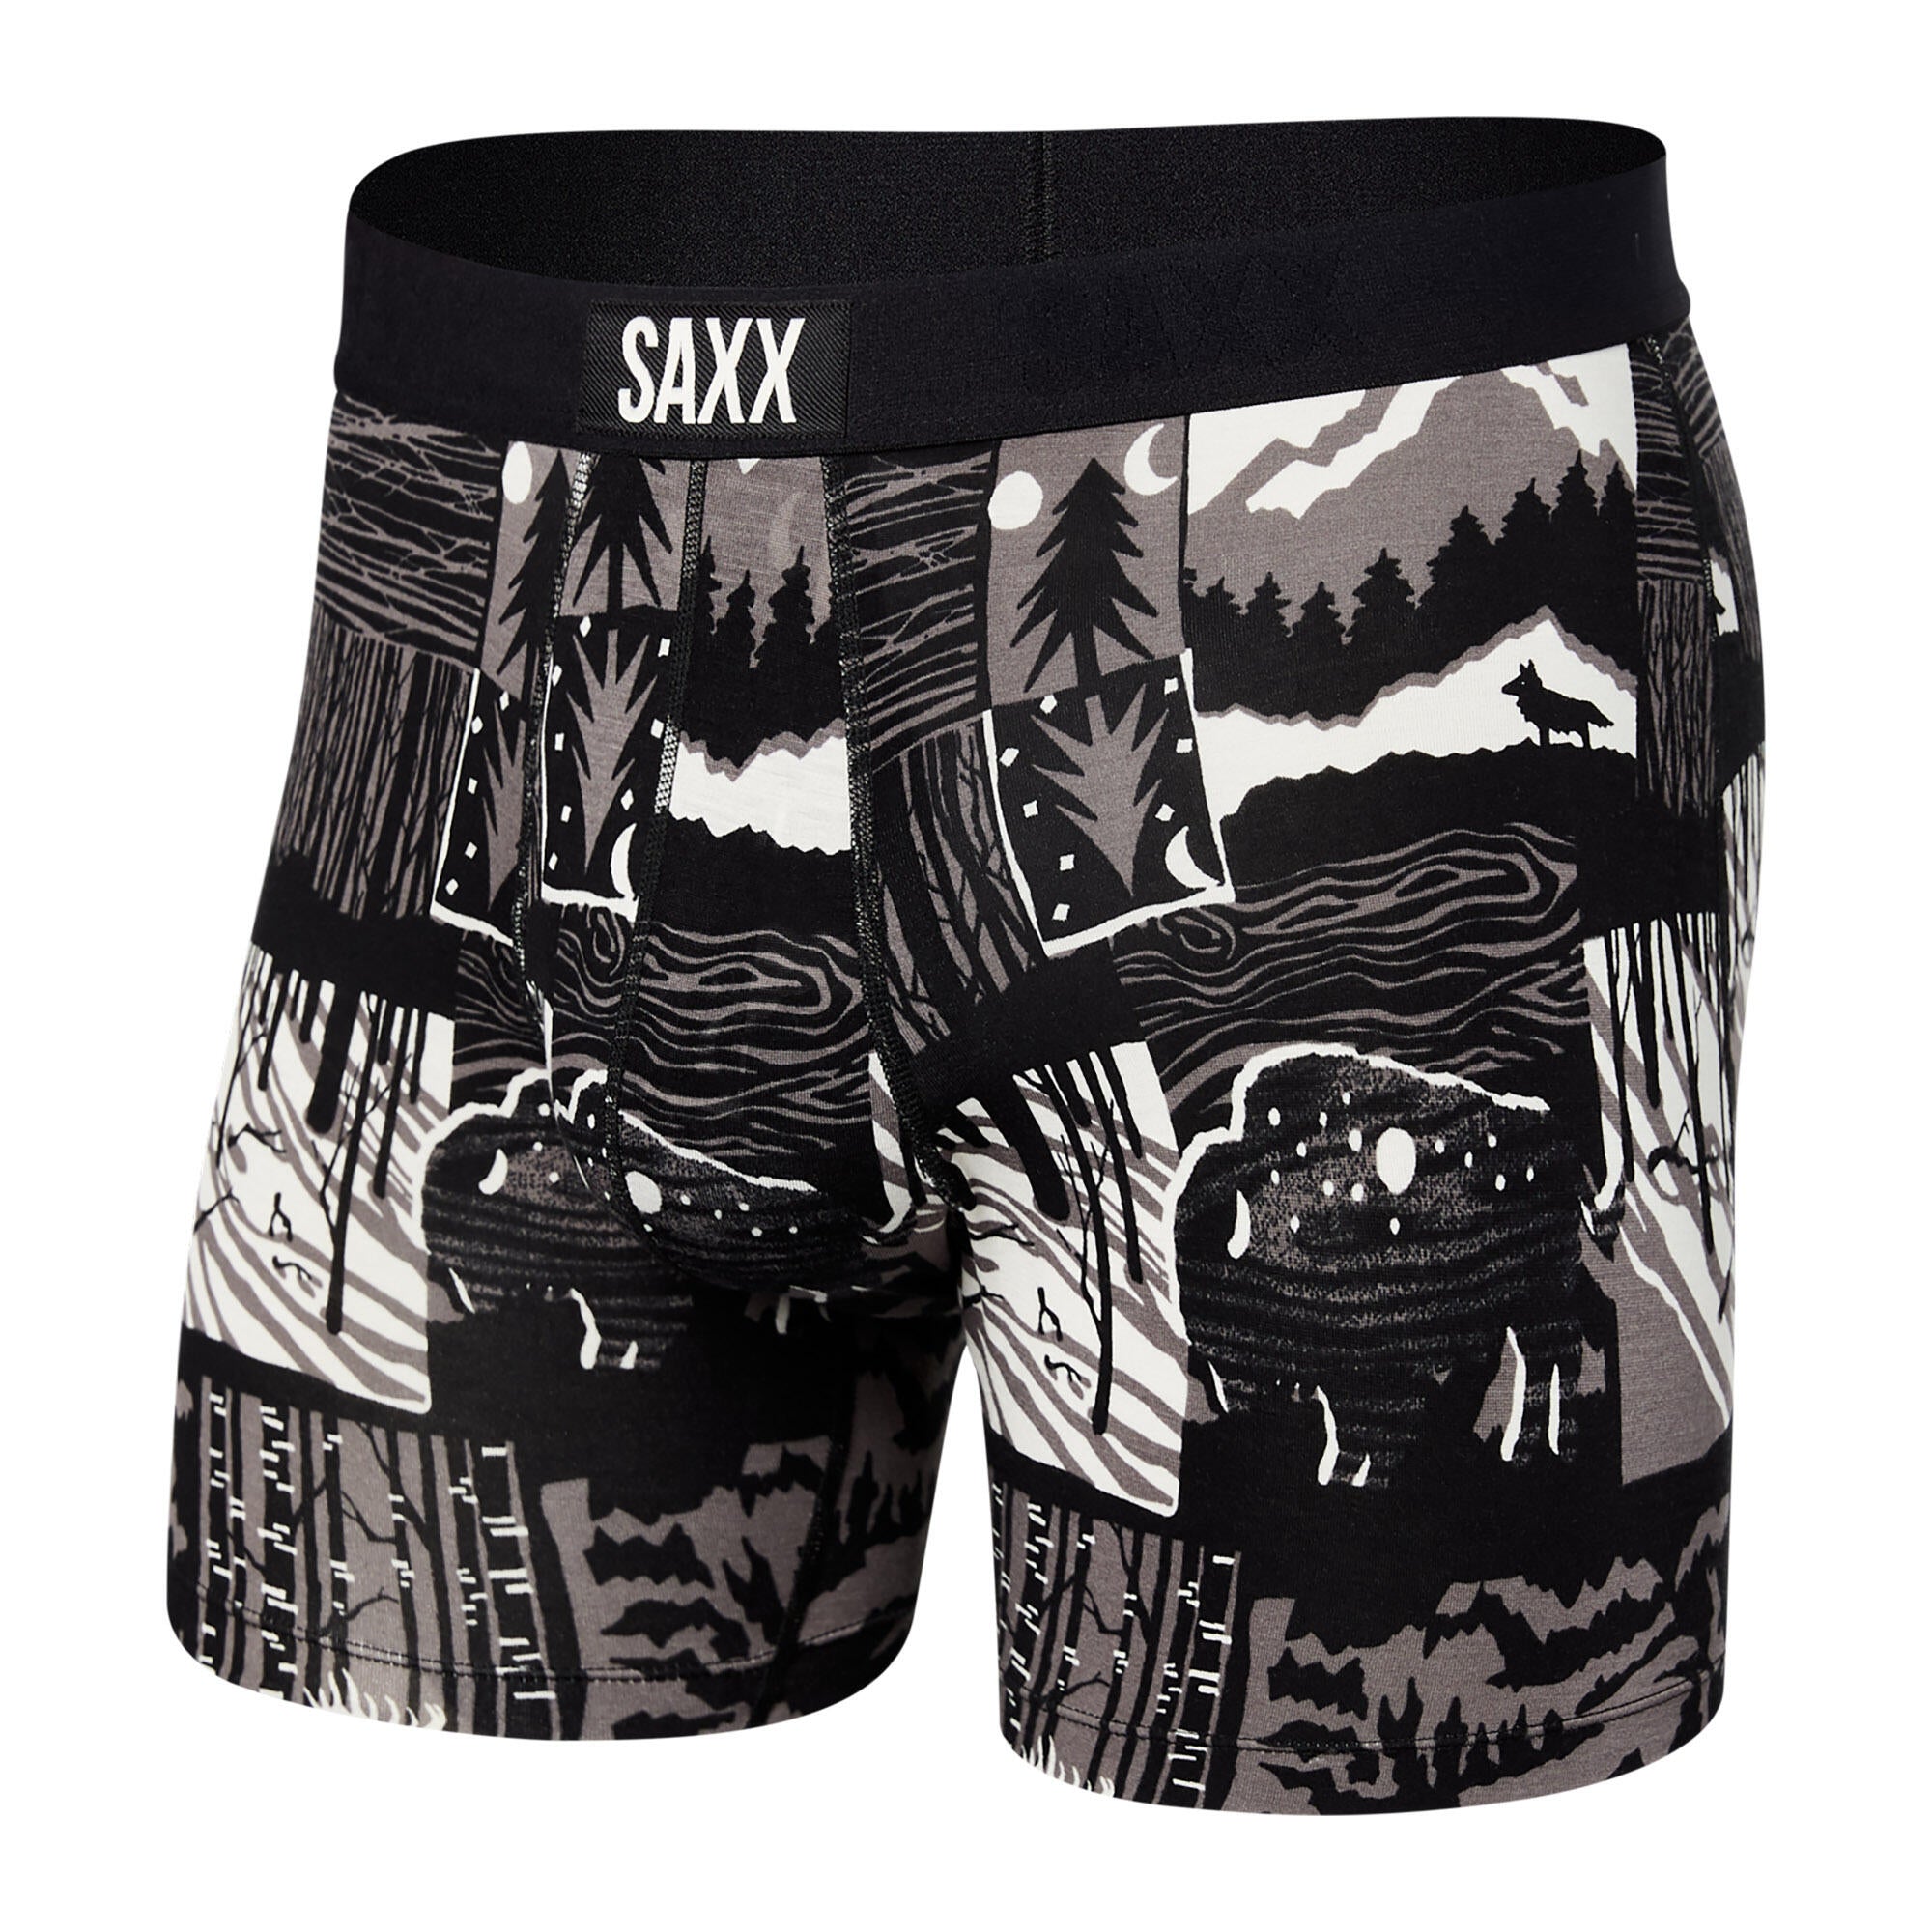 SAXX Vibe Boxer Brief - Winter Shadows | Source for Sports